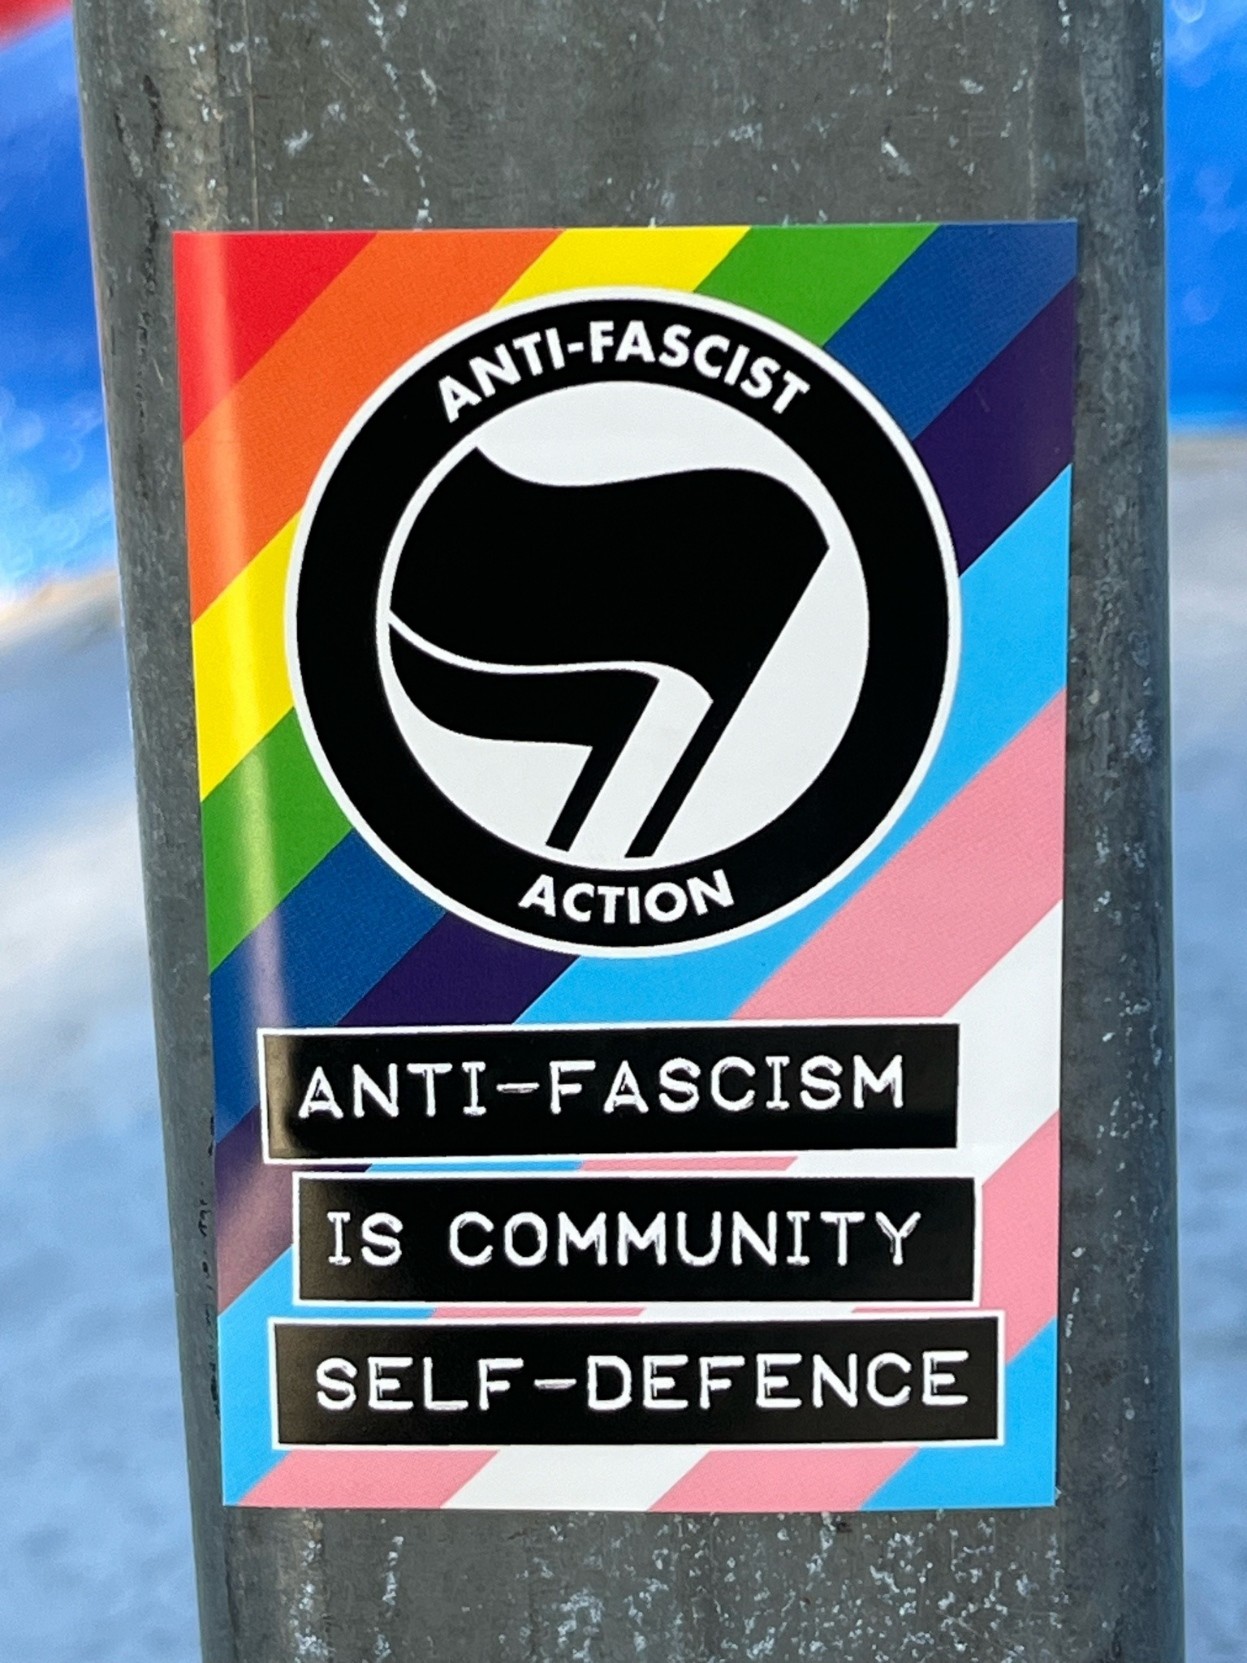 Antifa sticker on a pole featuring a rainbow & trans flag background and the words "Anti-Fascism is community self-defence"